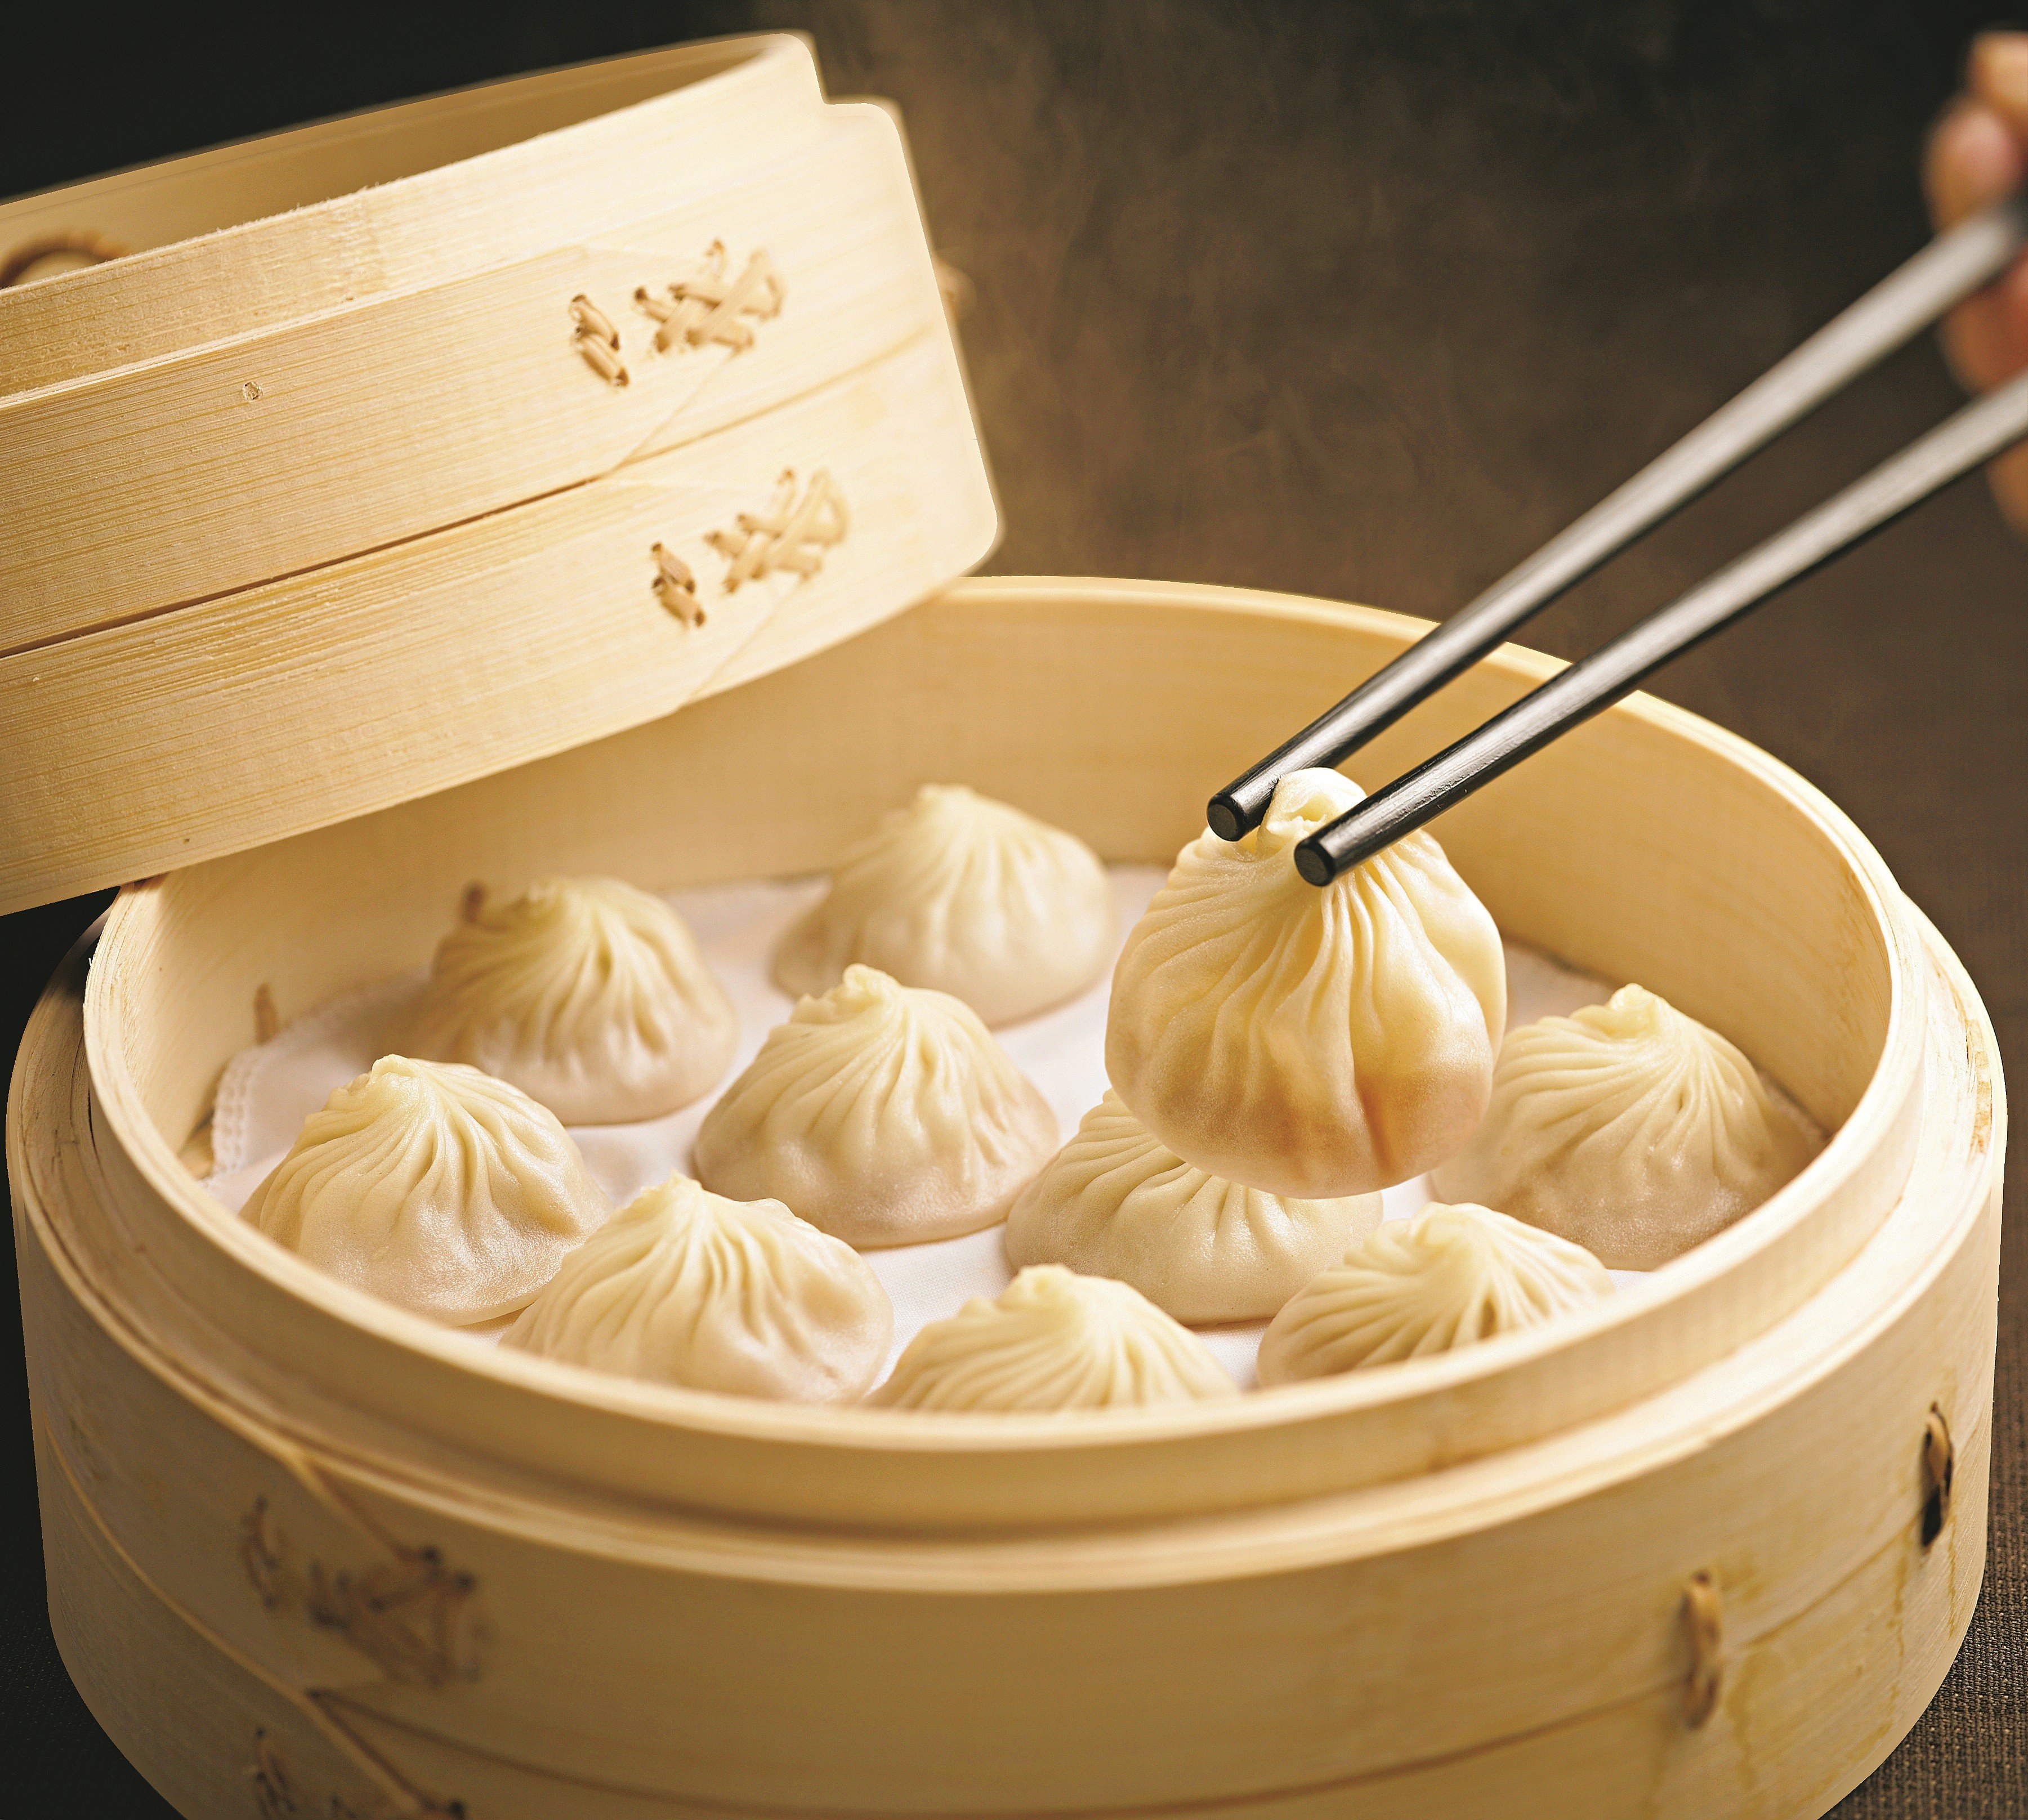 Din Tai Fung’s signature dish of xiaolongbao – or steamed pork soup dumplings.